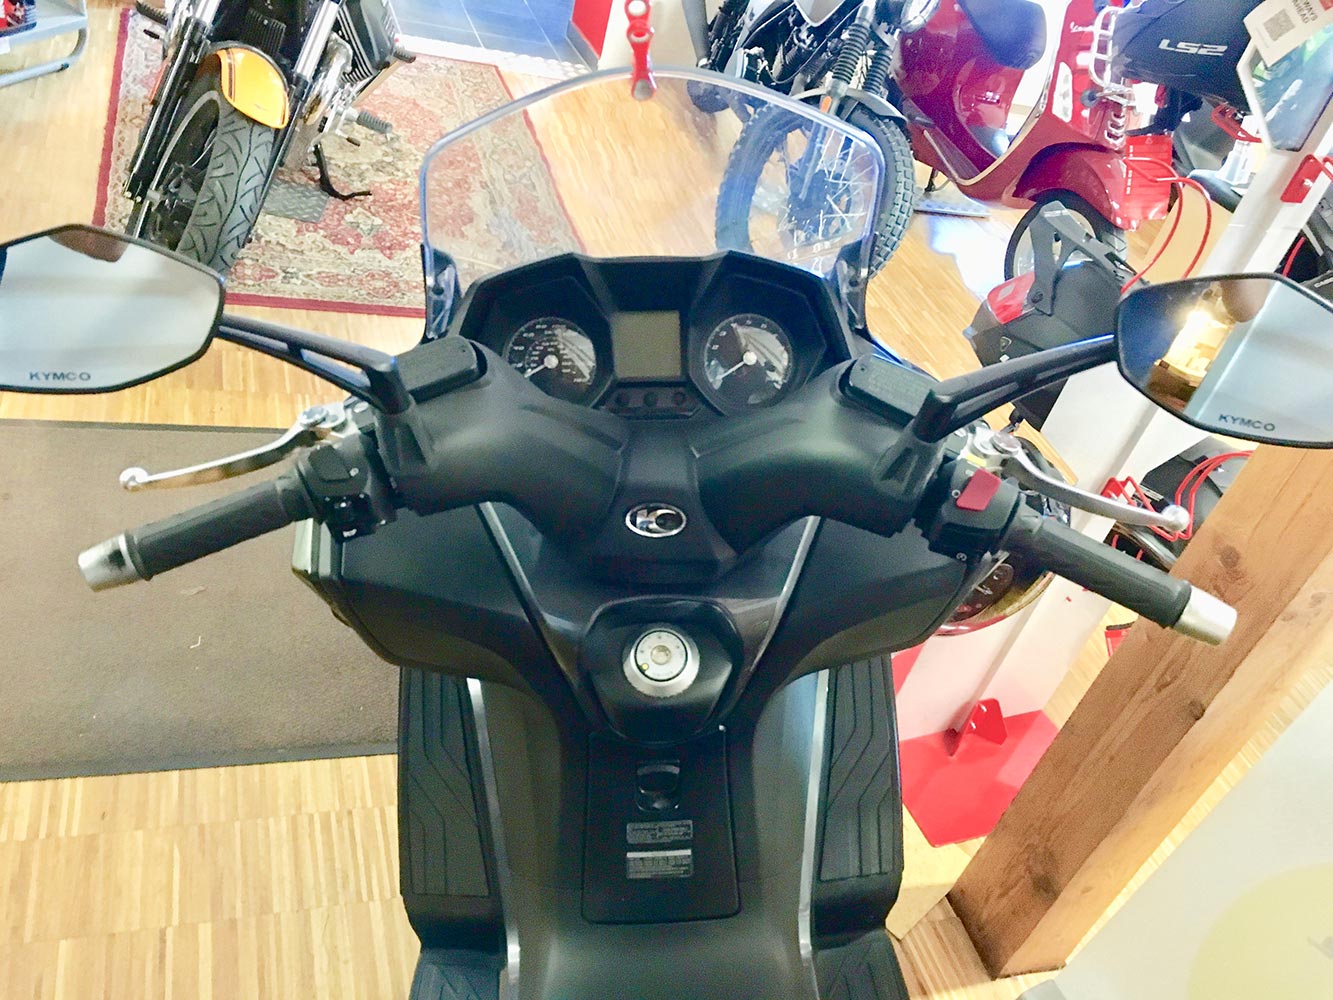 KYMCO Roller Downtown 350